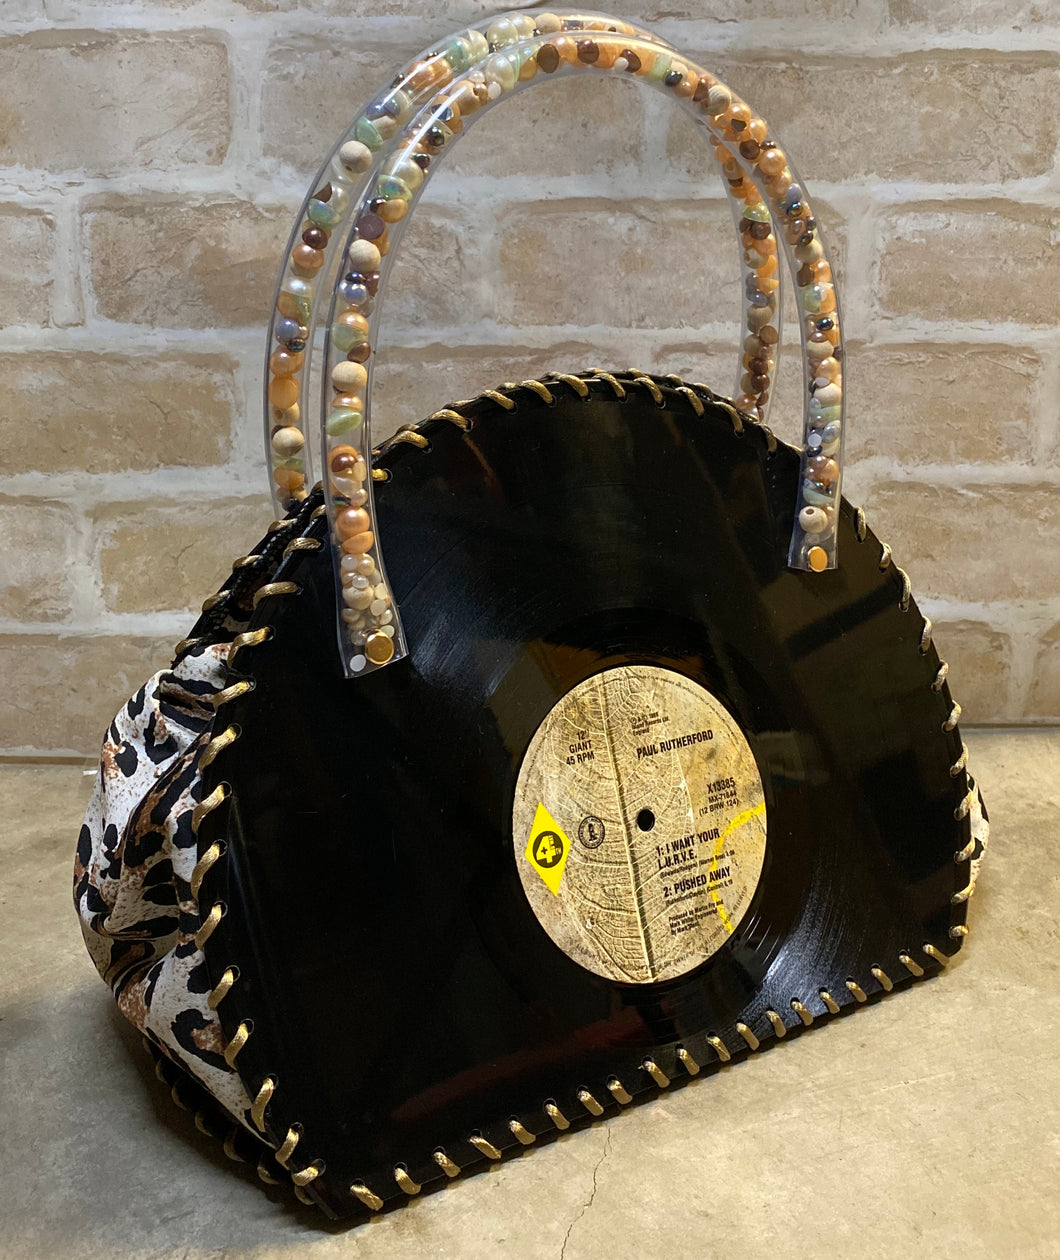 Loro*Piana Designer Purse With Lunch Compartment For Women Genuine Ostrich  Leather And Canvas, Two Way Zipper, Makeup Bag, And Handbag With O Stranded  2meq Design From Jaquemus_bags, $86.33 | DHgate.Com